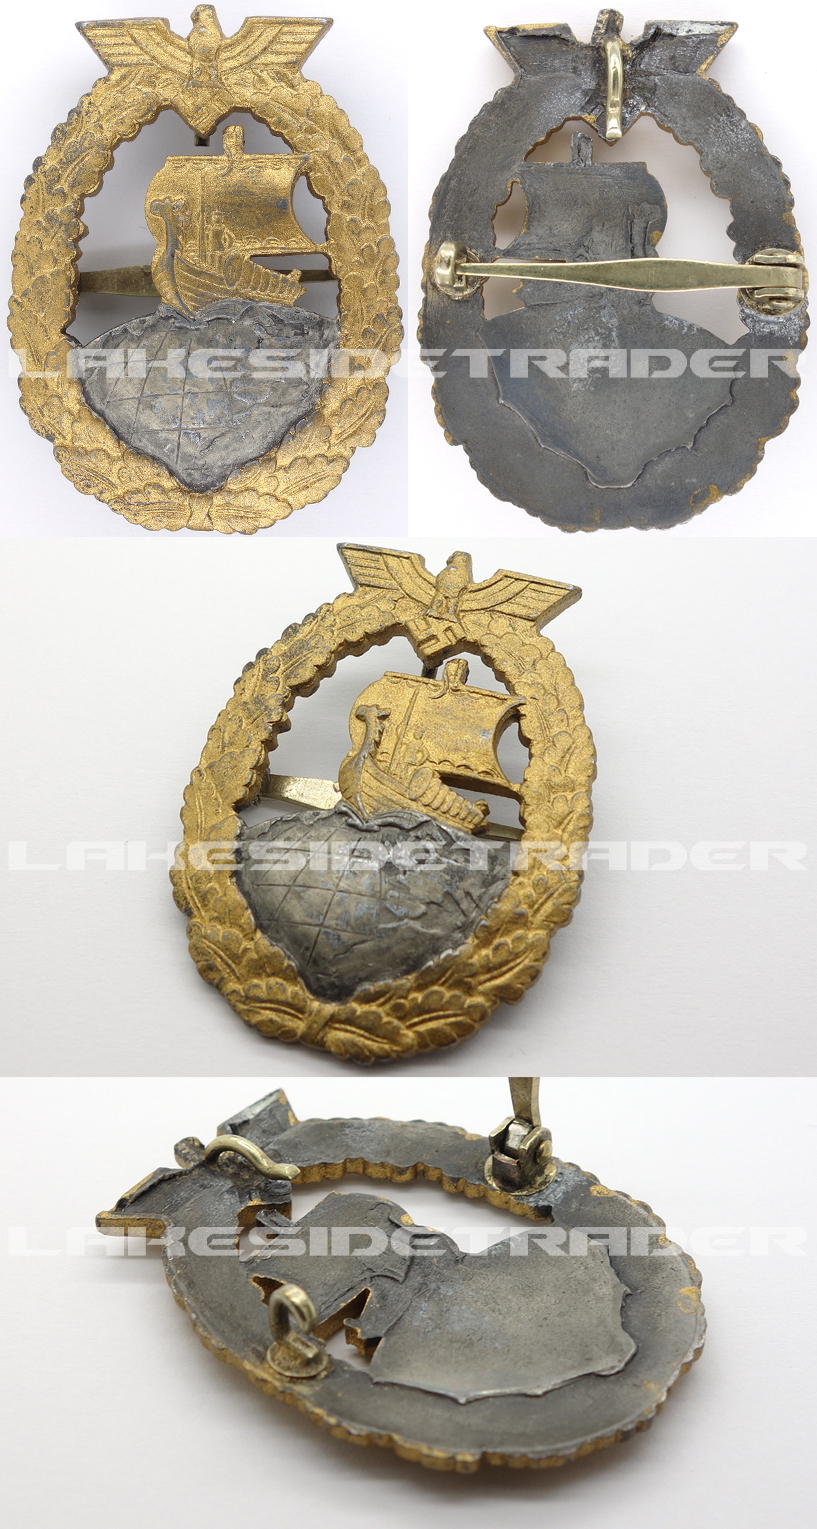 Auxiliary Cruiser War Badge by Bacqueville